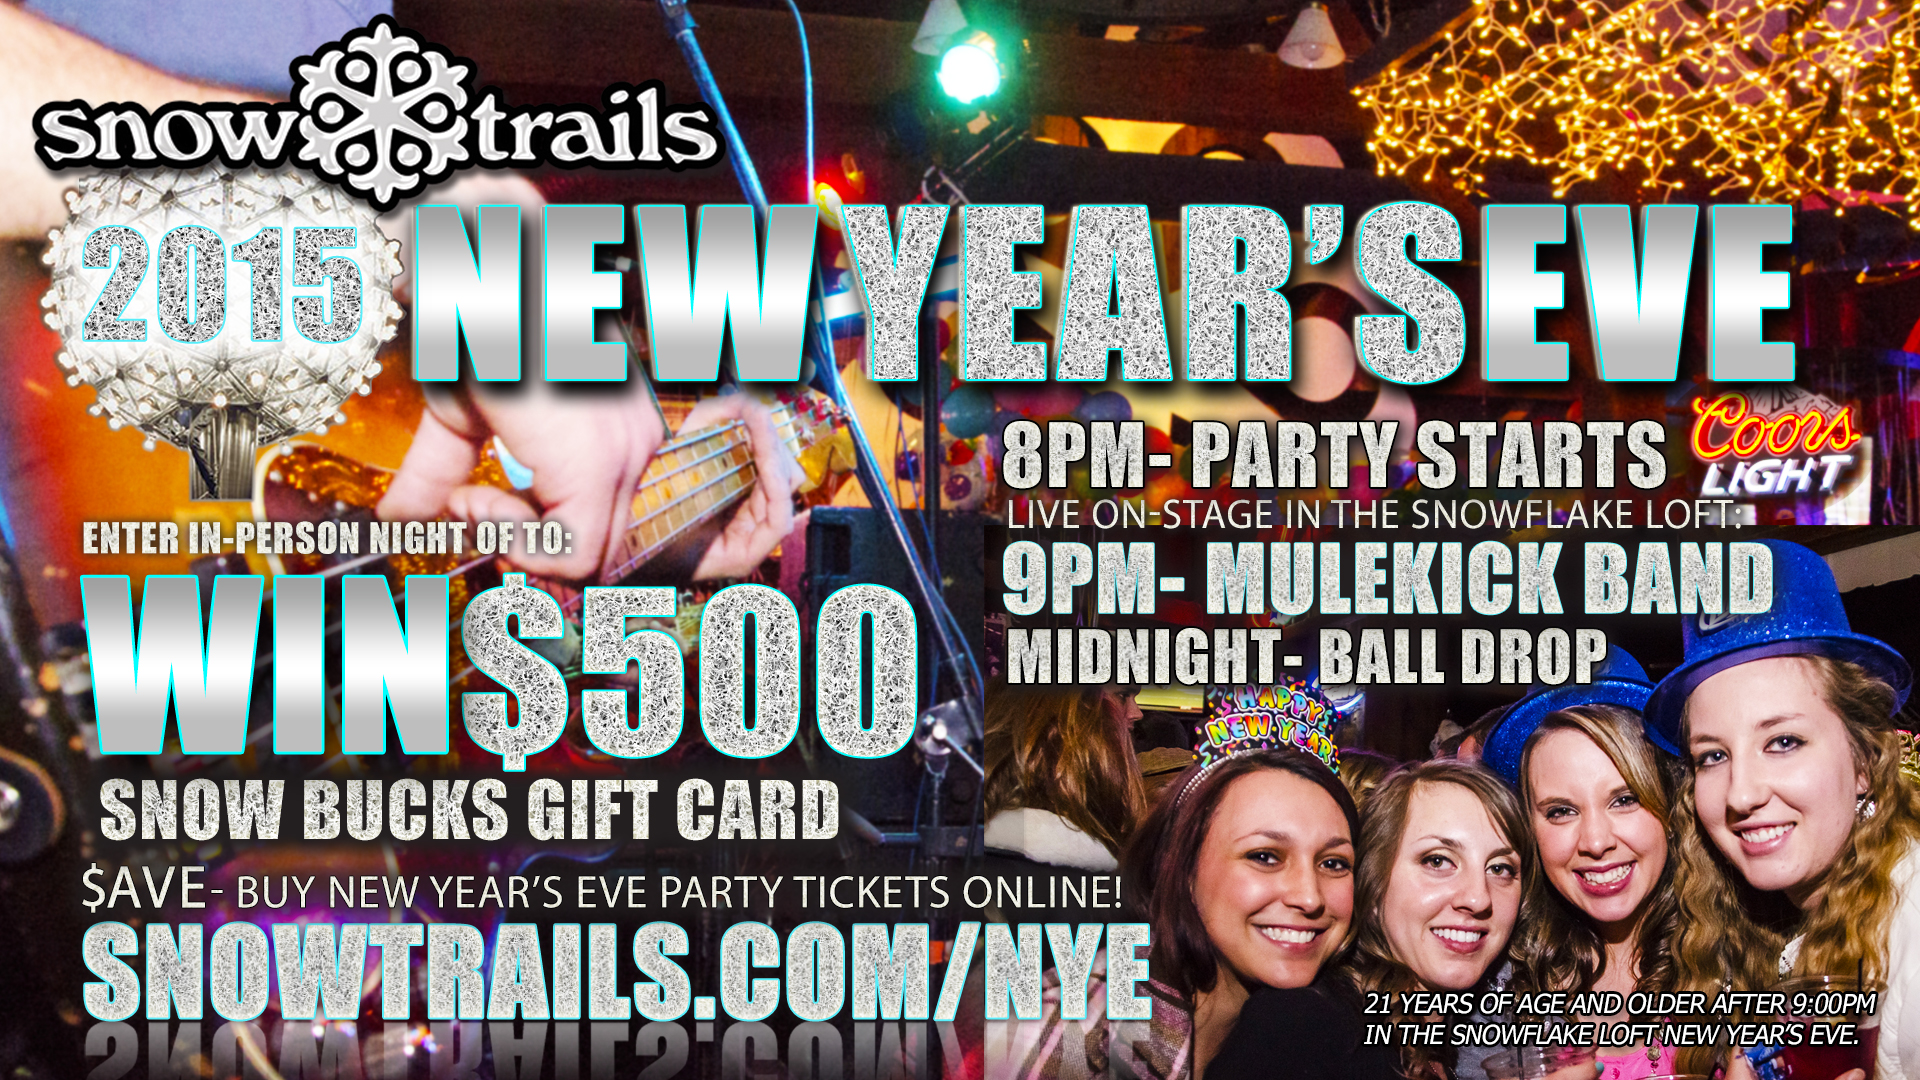 Win $500 at Snow Trails New Year's Eve Party with Mule Kick Band